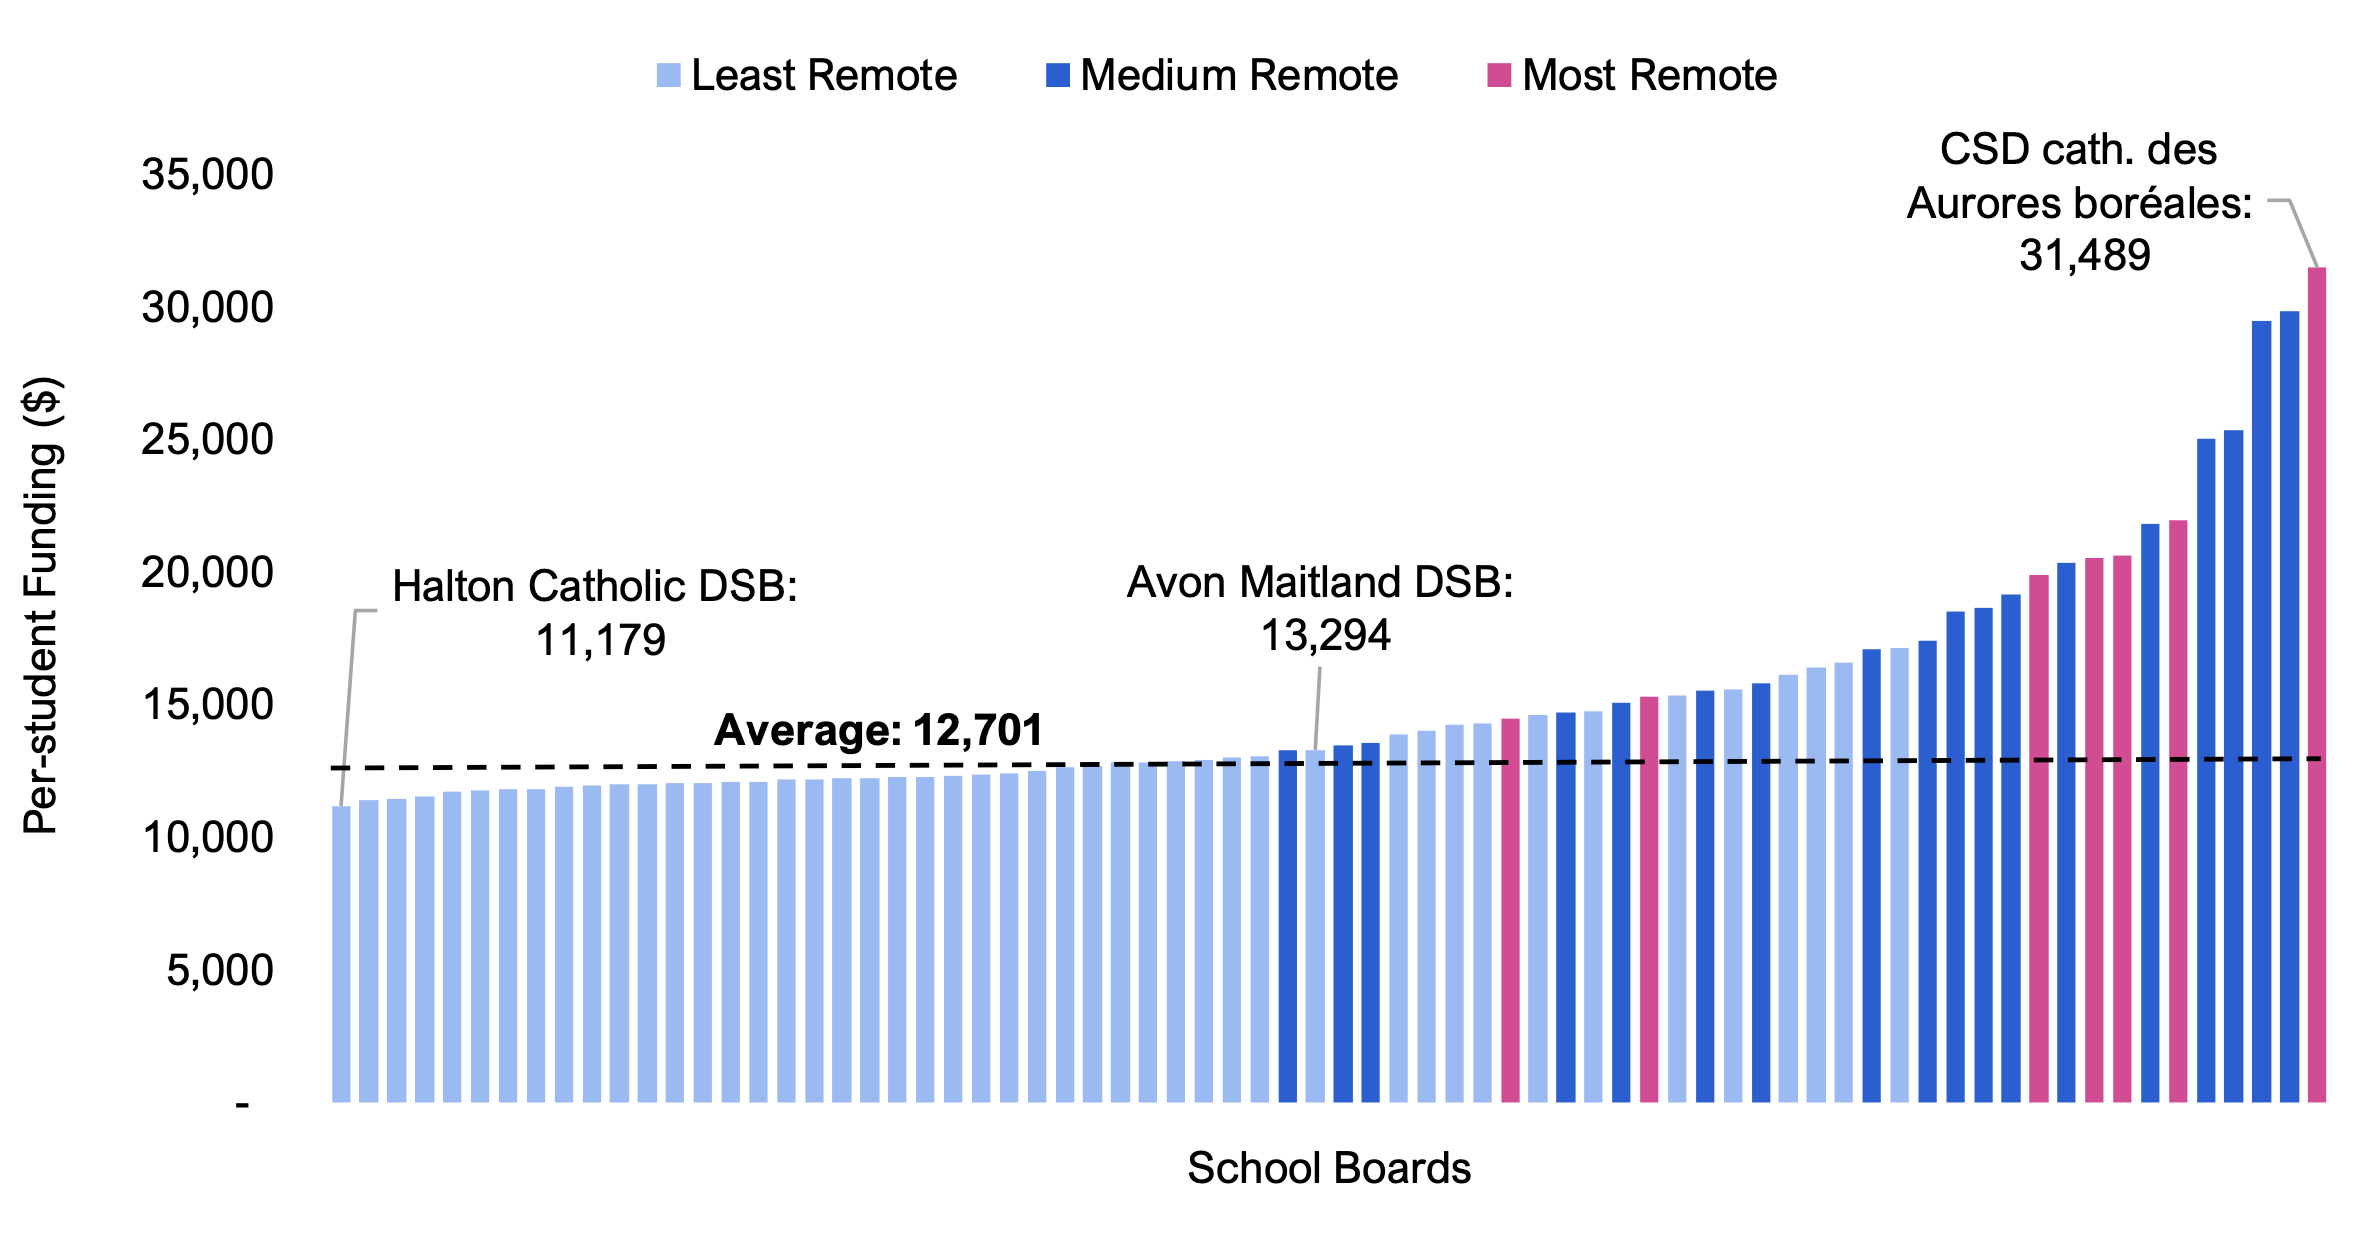 Figure 4.6 shows per-student GSN funding by school board, broken down by school board remoteness (least remote, medium remote, and most remote). The values range from a low of $11,179 for the Halton Catholic DSB to a high of $31,489 for the CSD catholique des Aurores boréales, with an overall average of $12,701. On average, medium remote and most remote school boards received higher per-student GSN funding and least remote school boards received lower per-student GSN funding.